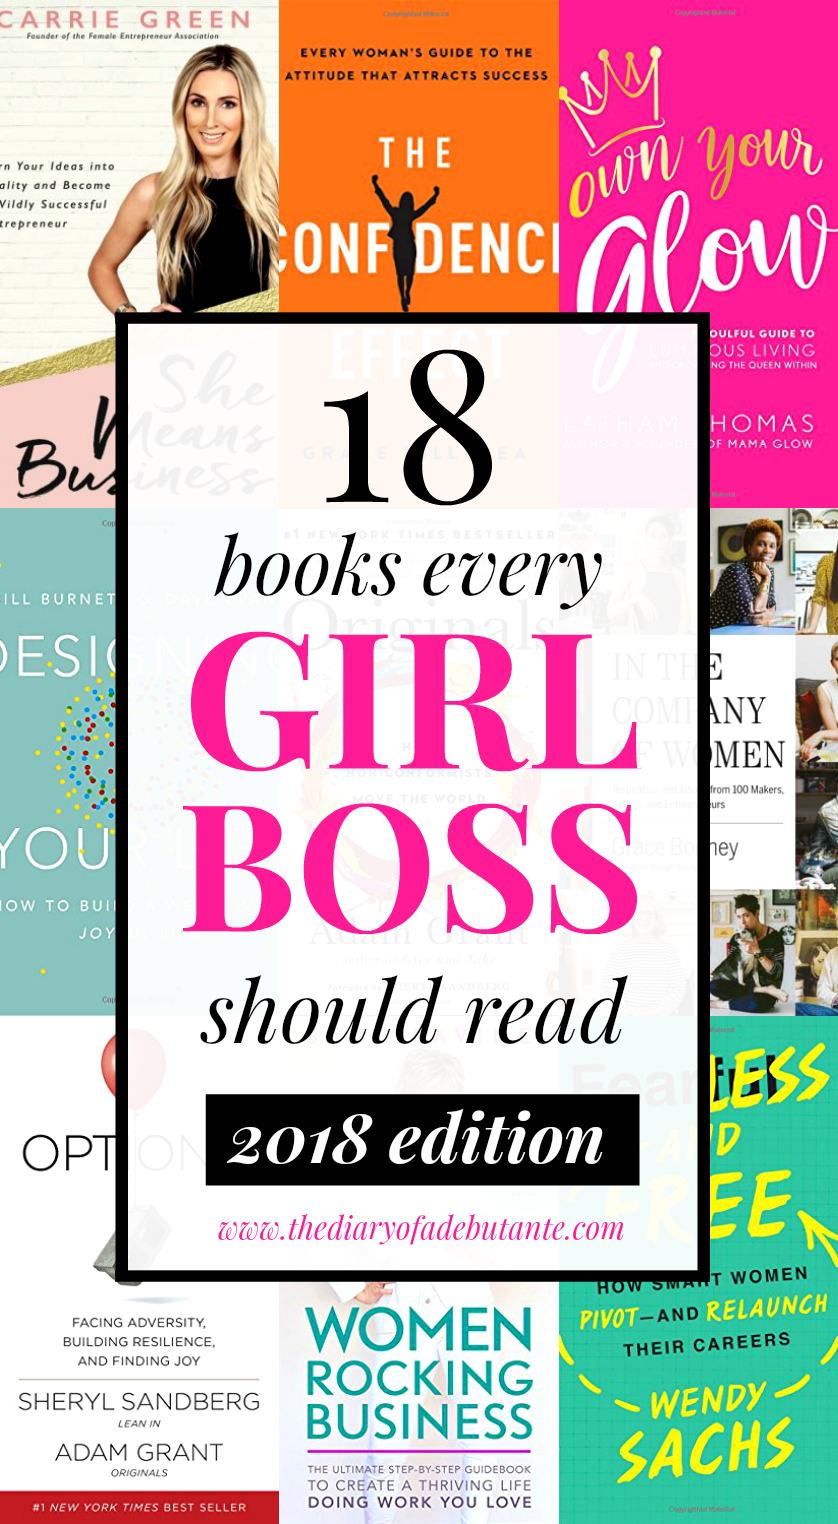 18 of the best business books for women to read in 2018, Books for Girlbosses 2018 by actuarial scientist-turned-fashion blogger Stephanie Ziajka from Diary of a Debutante